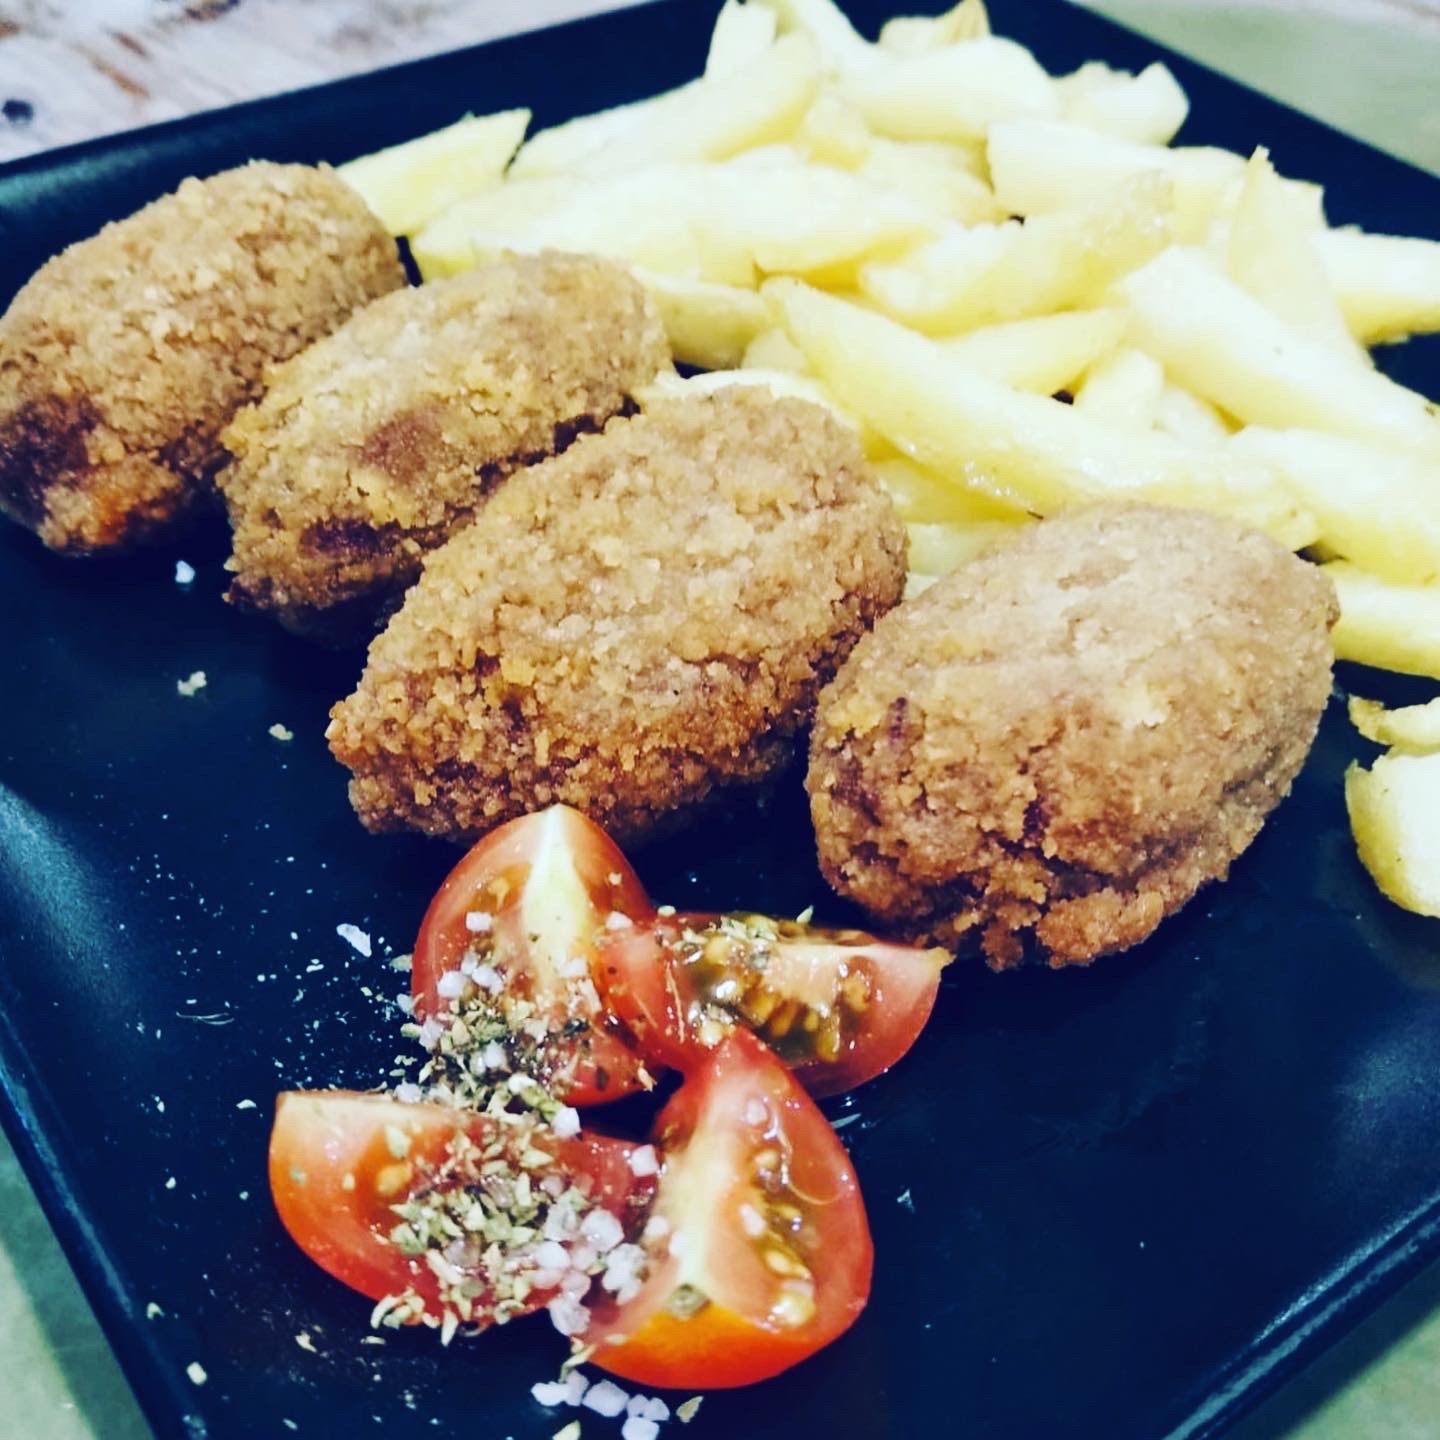 Cheeks croquettes PX-style